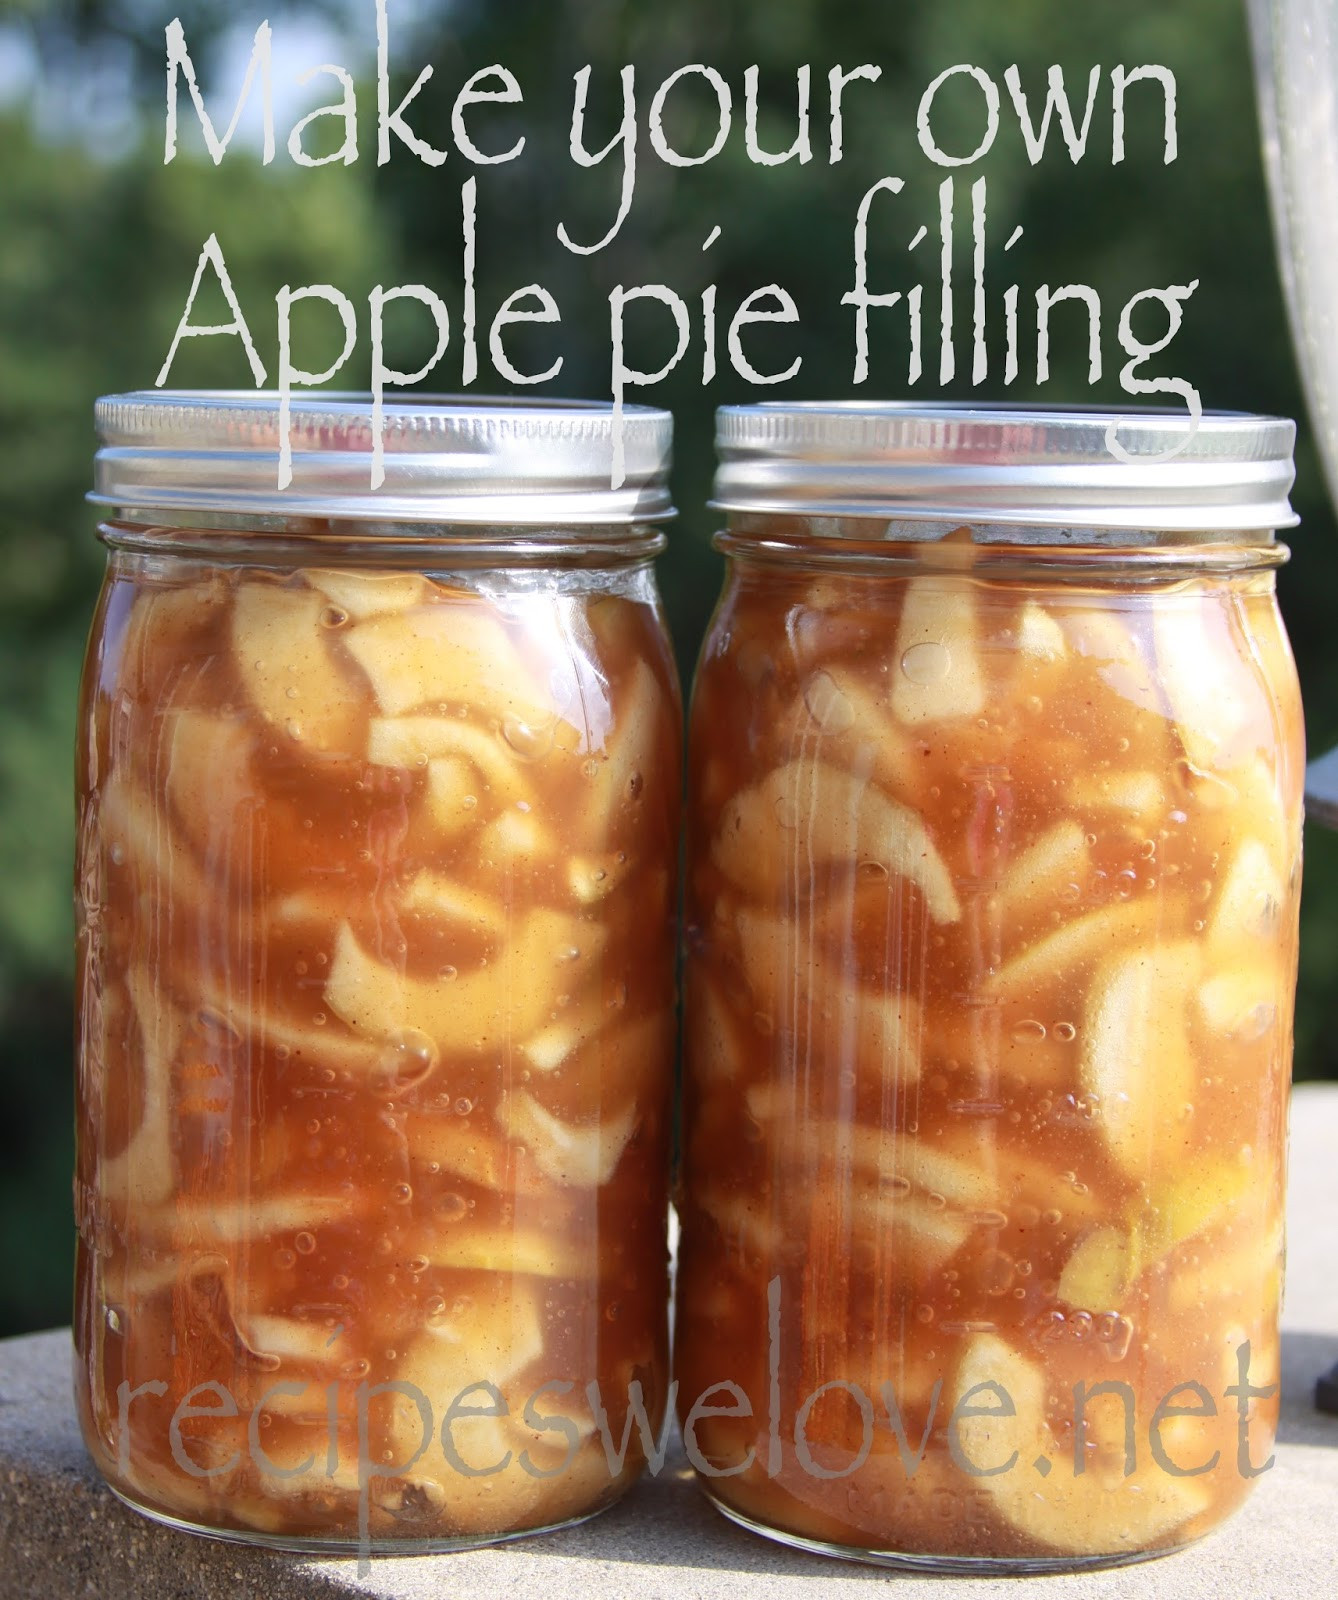 Apple Pie Filling Canned
 Recipes We Love Apple Pie Filling water bath canning